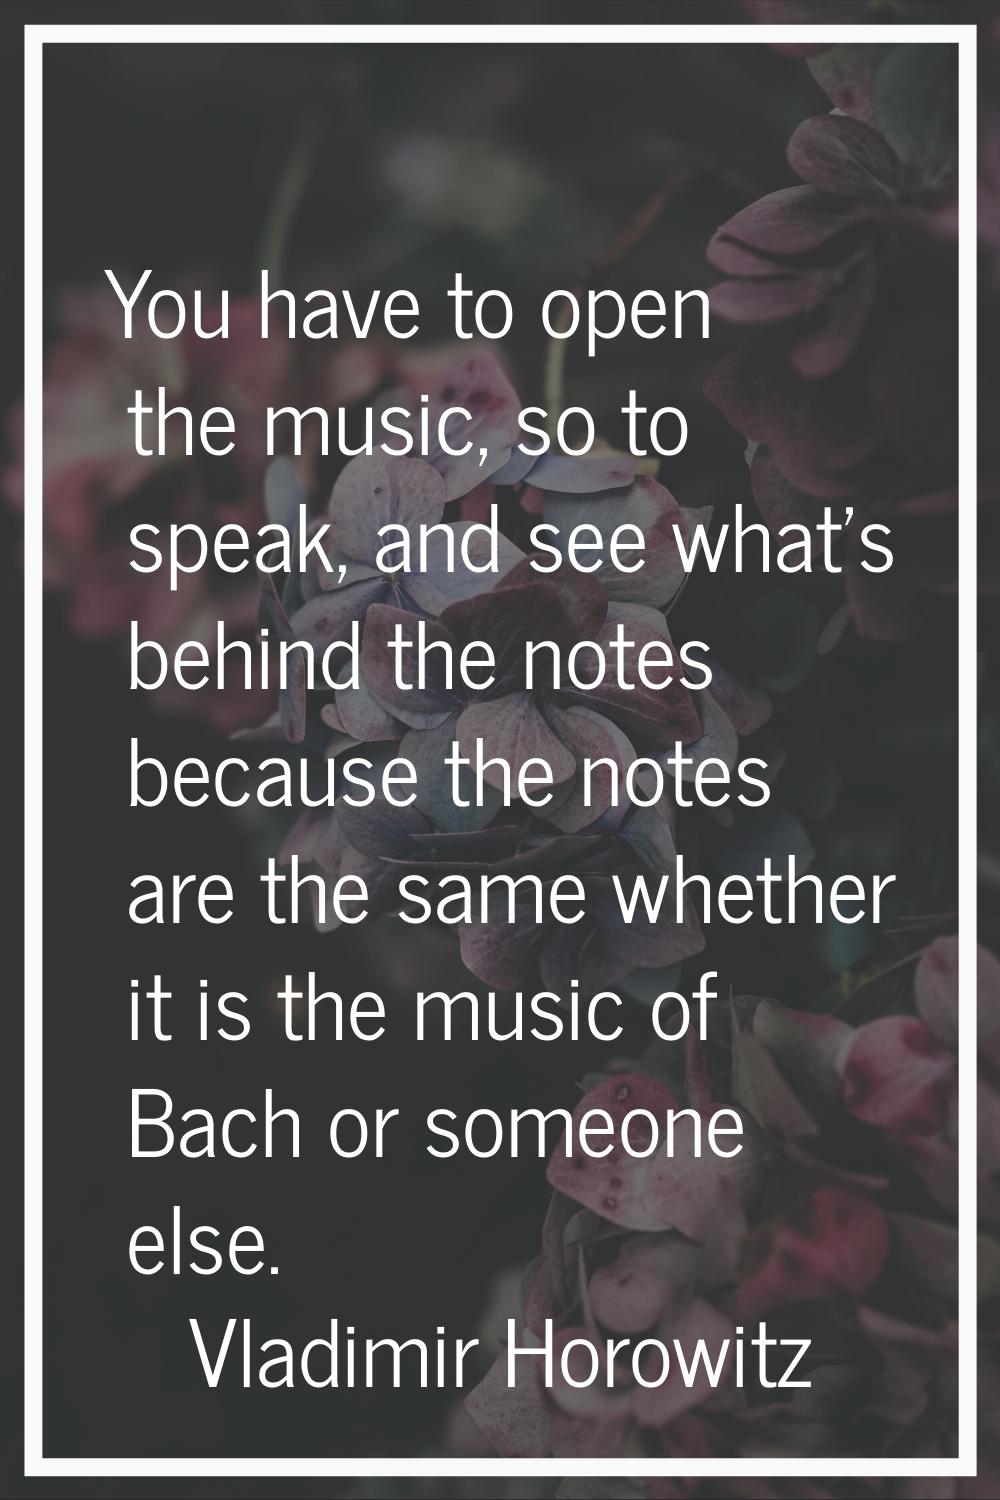 You have to open the music, so to speak, and see what's behind the notes because the notes are the 